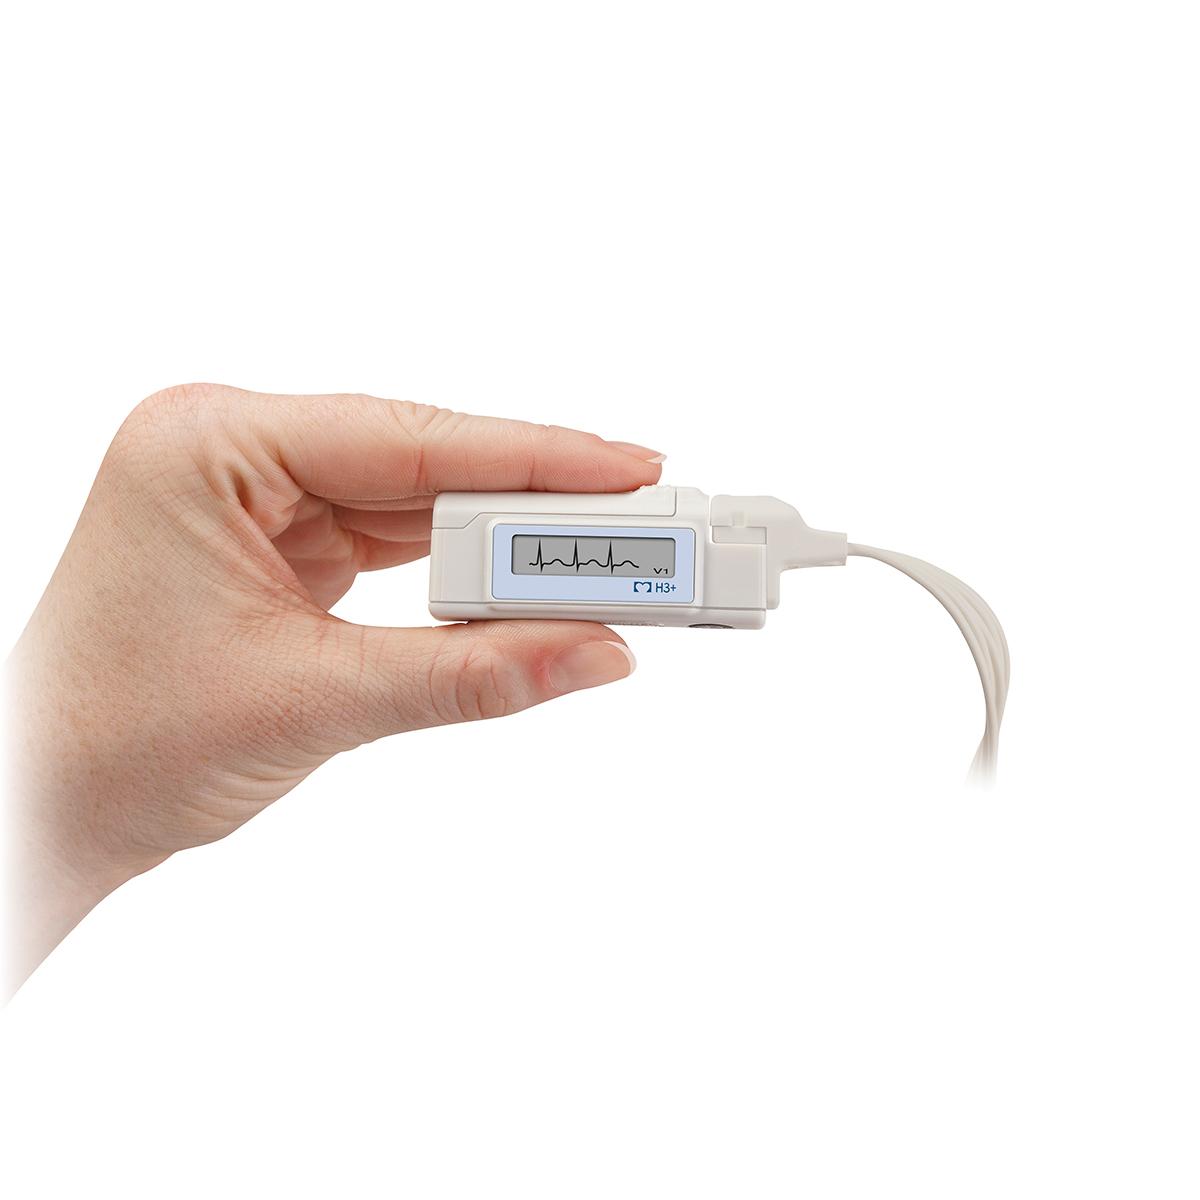 An H3+ Digital Holter Recorder is held between fingers, with waveforms visible on screen